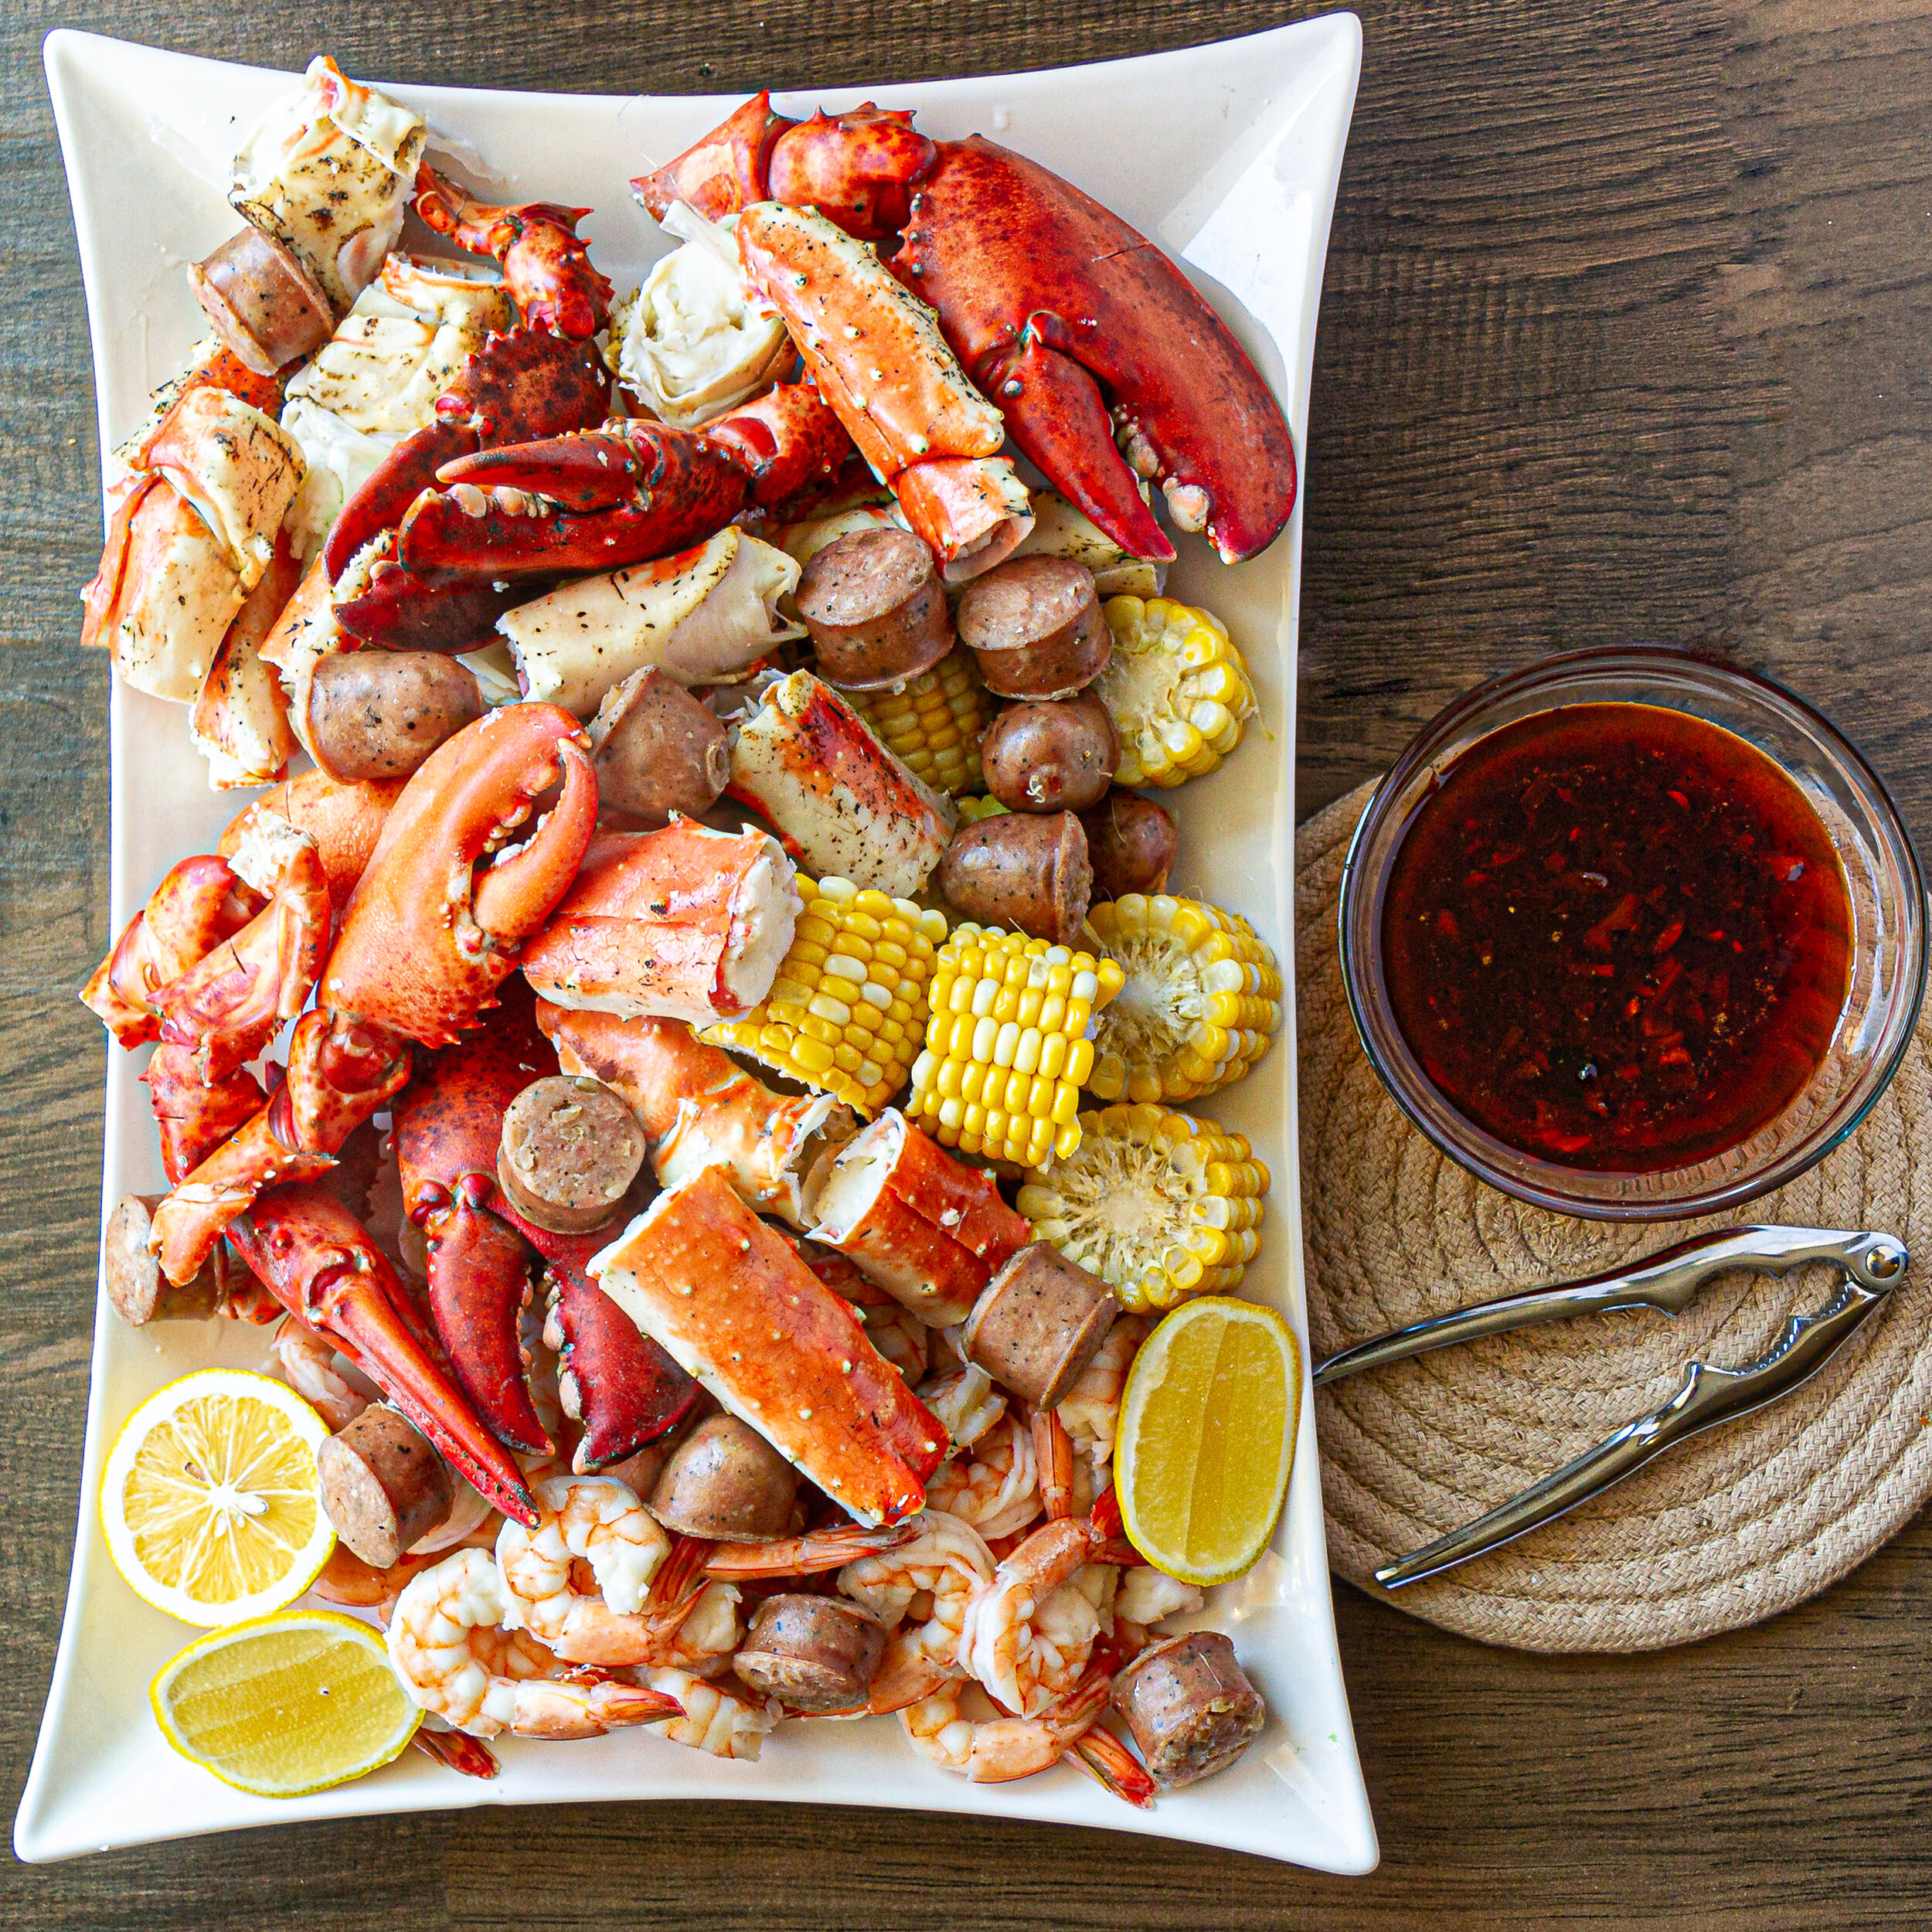 Seafood Boil With Red Spicy Garlic Butter Dipping Sauce Vietnamese Home Cooking Recipes Watch the show and be the judge! red spicy garlic butter dipping sauce